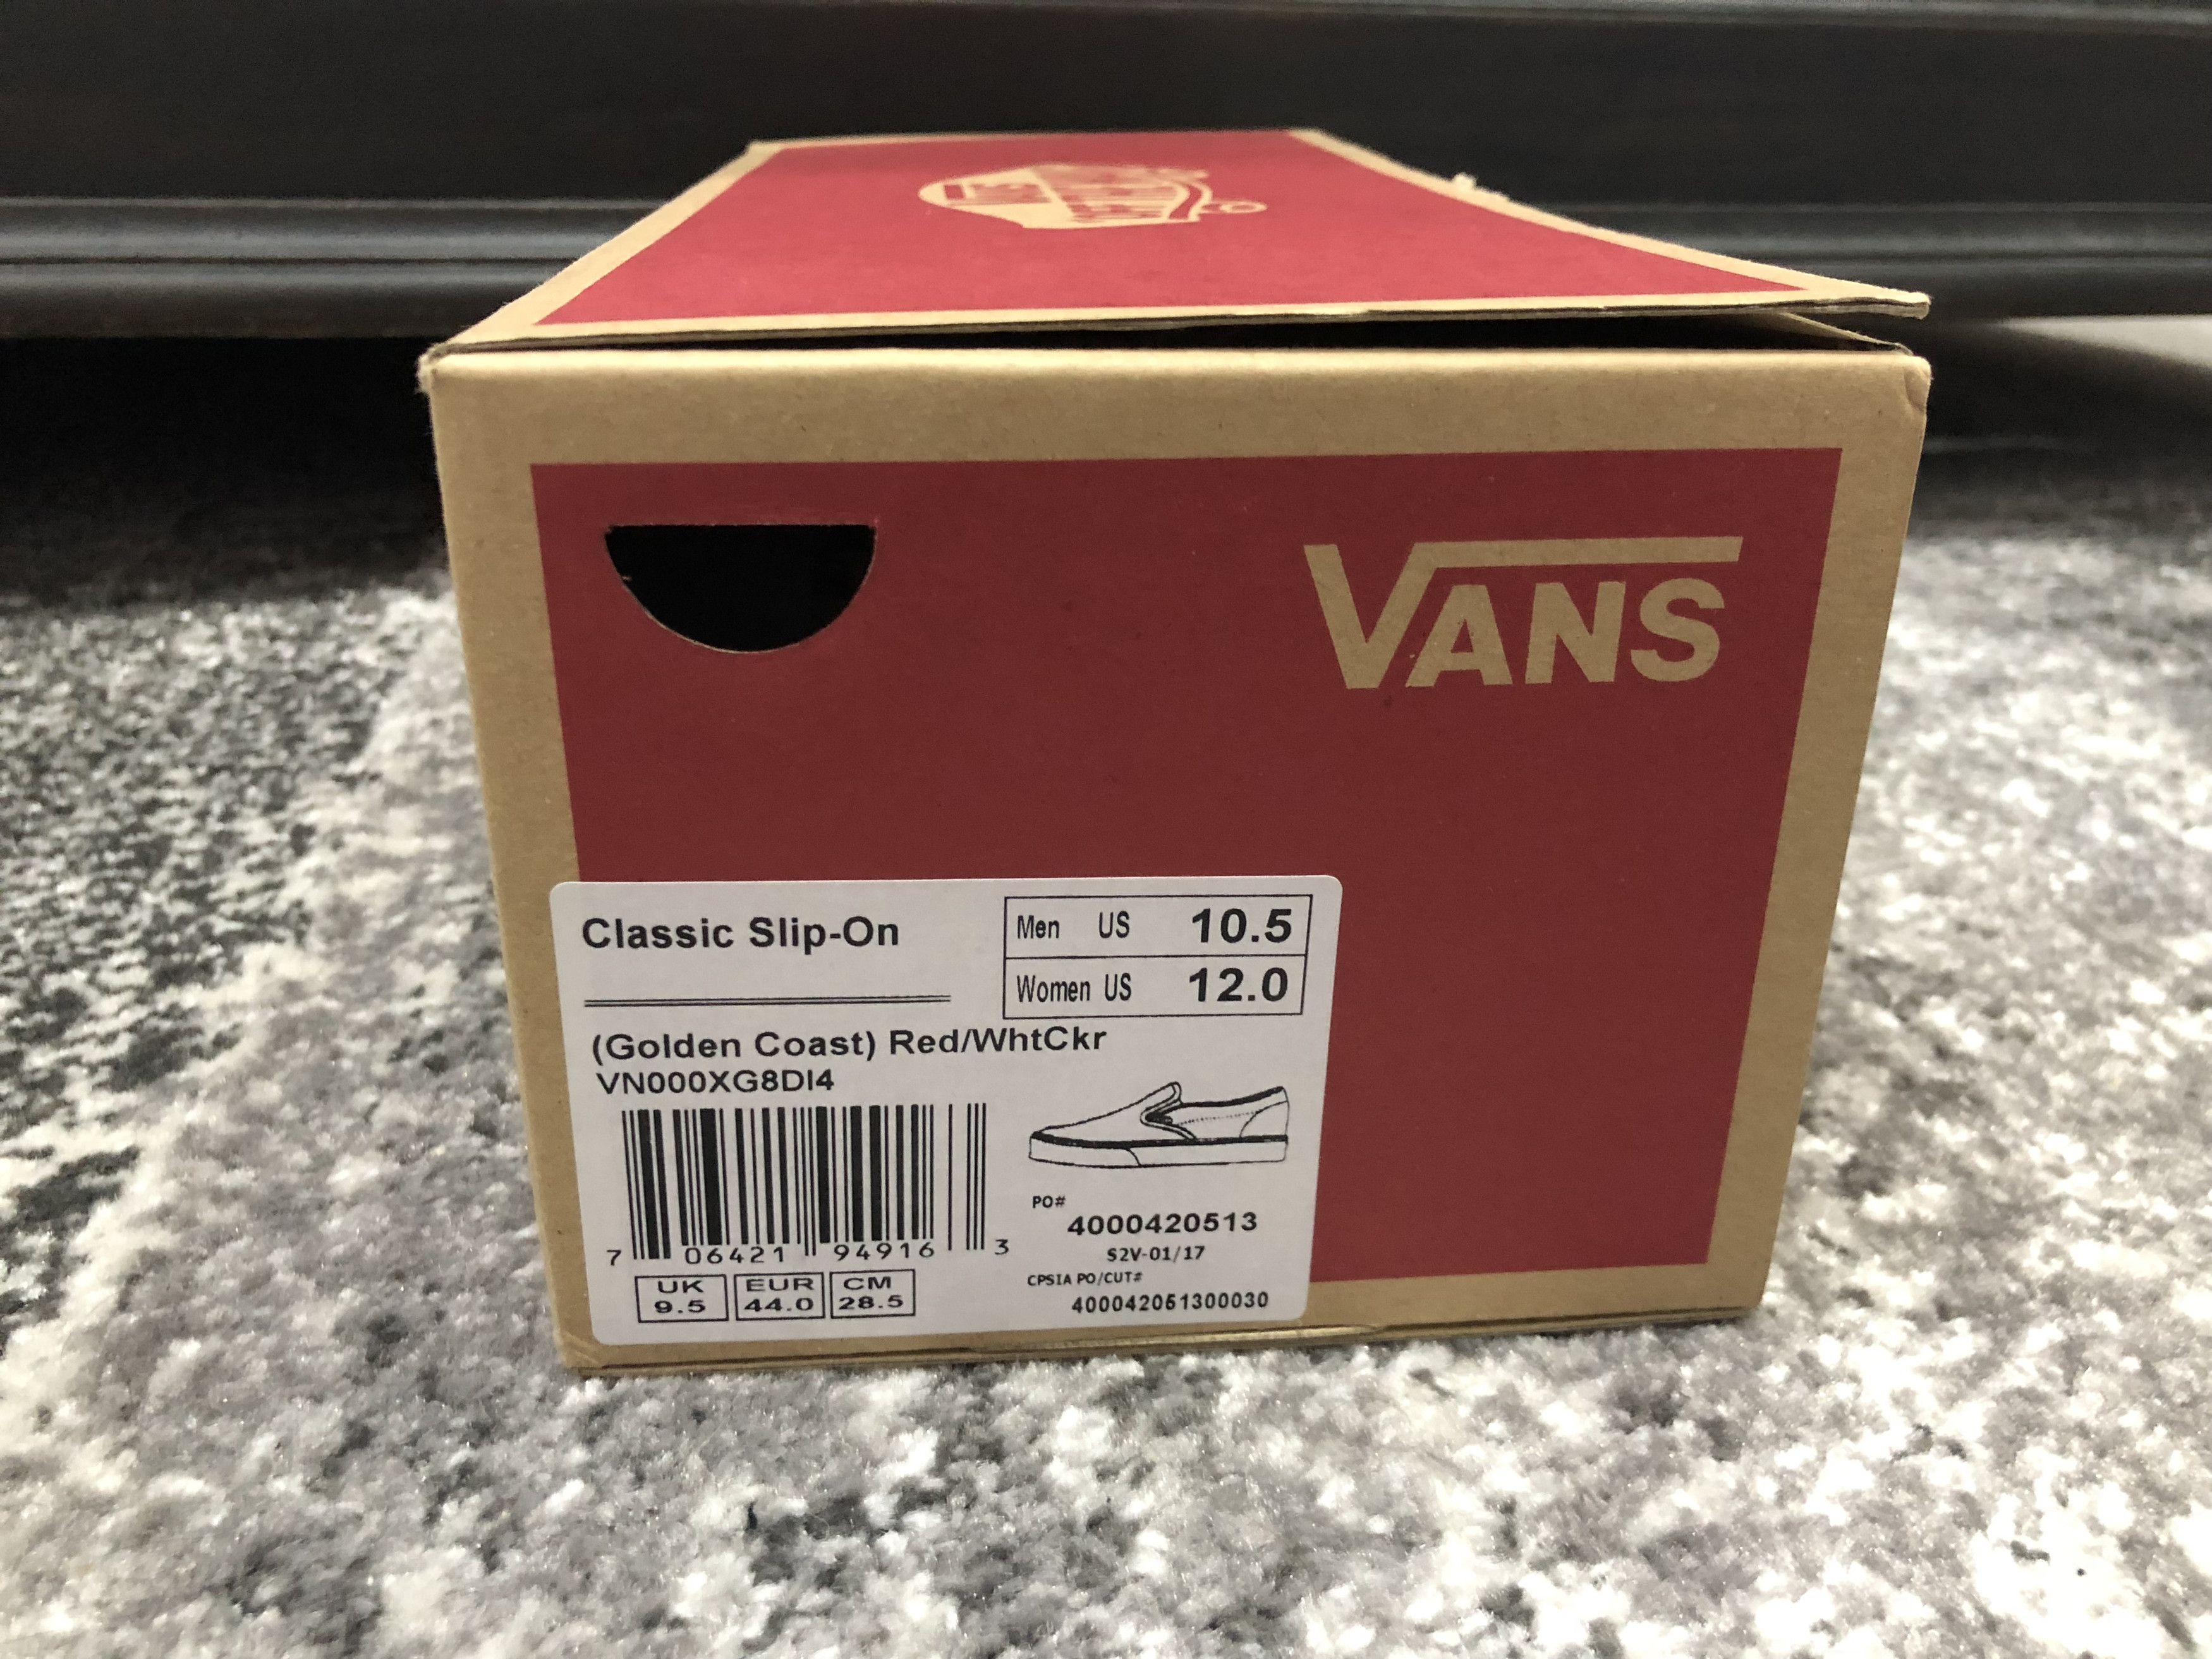 Vans Red Checkerboard Slip Ons Size US 10.5 / EU 43-44 - 2 Preview